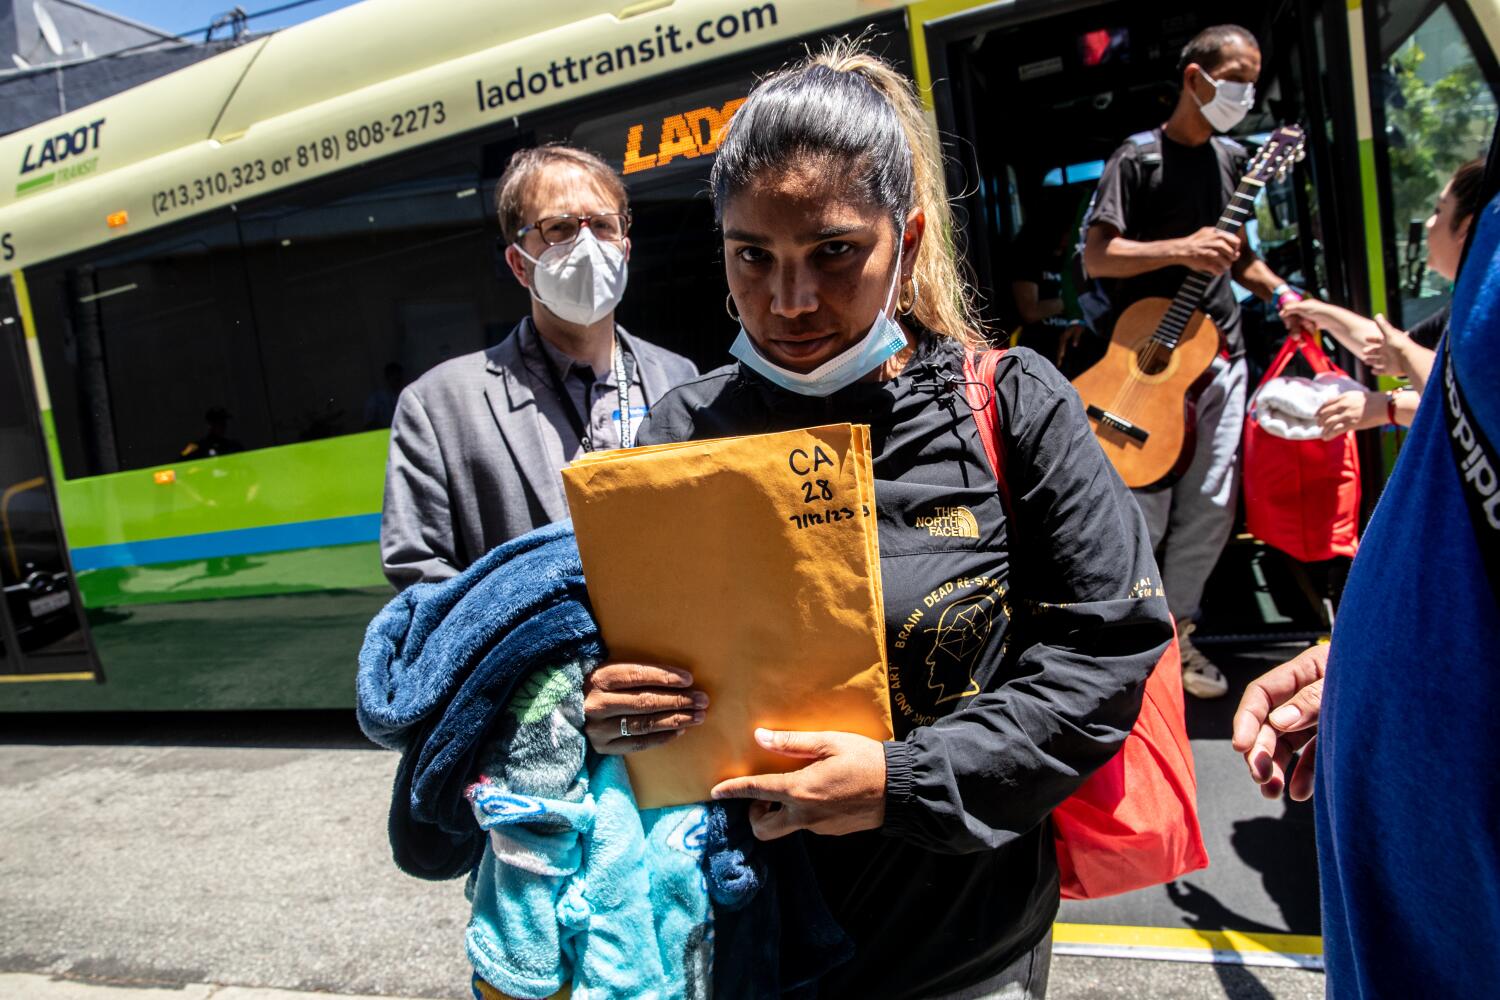 Texas sends 15th bus of asylum seekers to Los Angeles. It's the second in four days